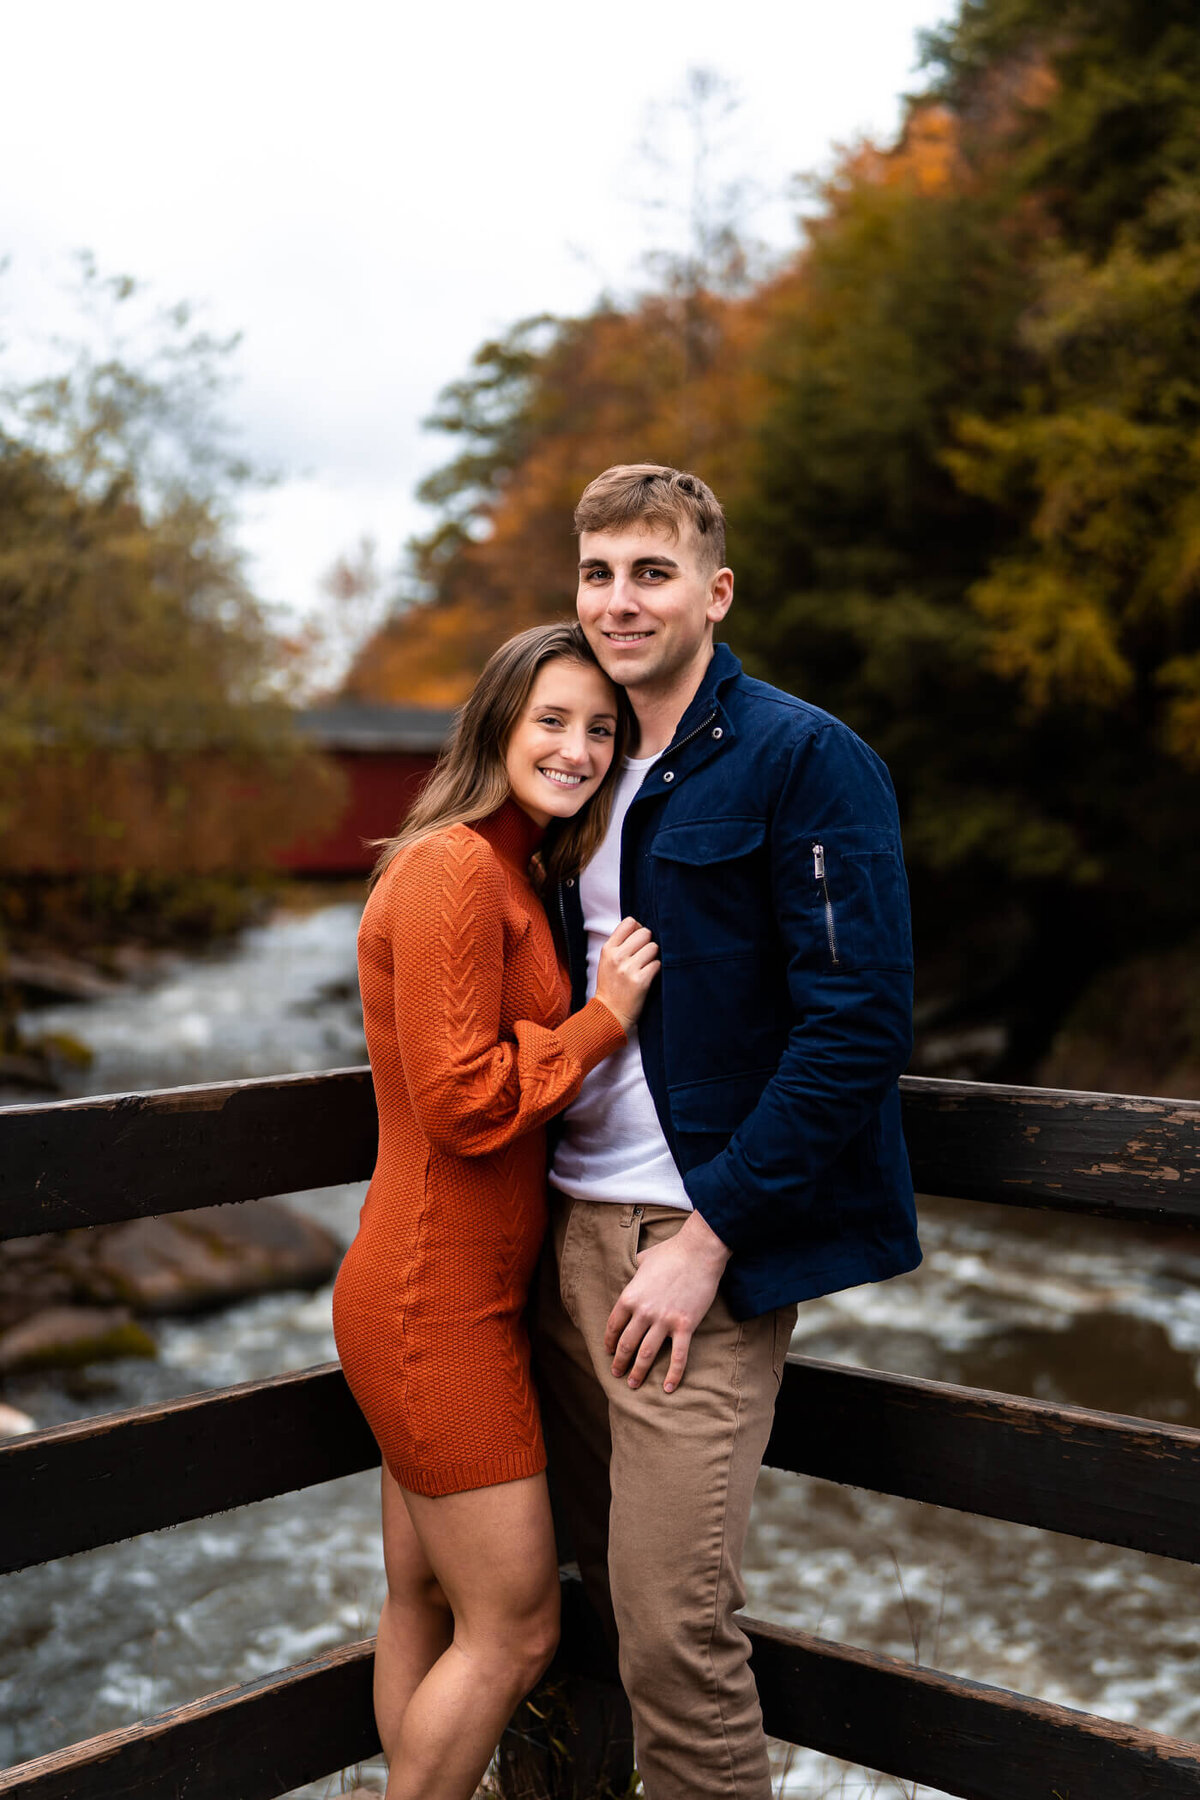 Pittsburgh engagement photos of a couple holding each other in front of the Mill at McConnell's Mill State Park, PA. Captured during golden hour sunset.